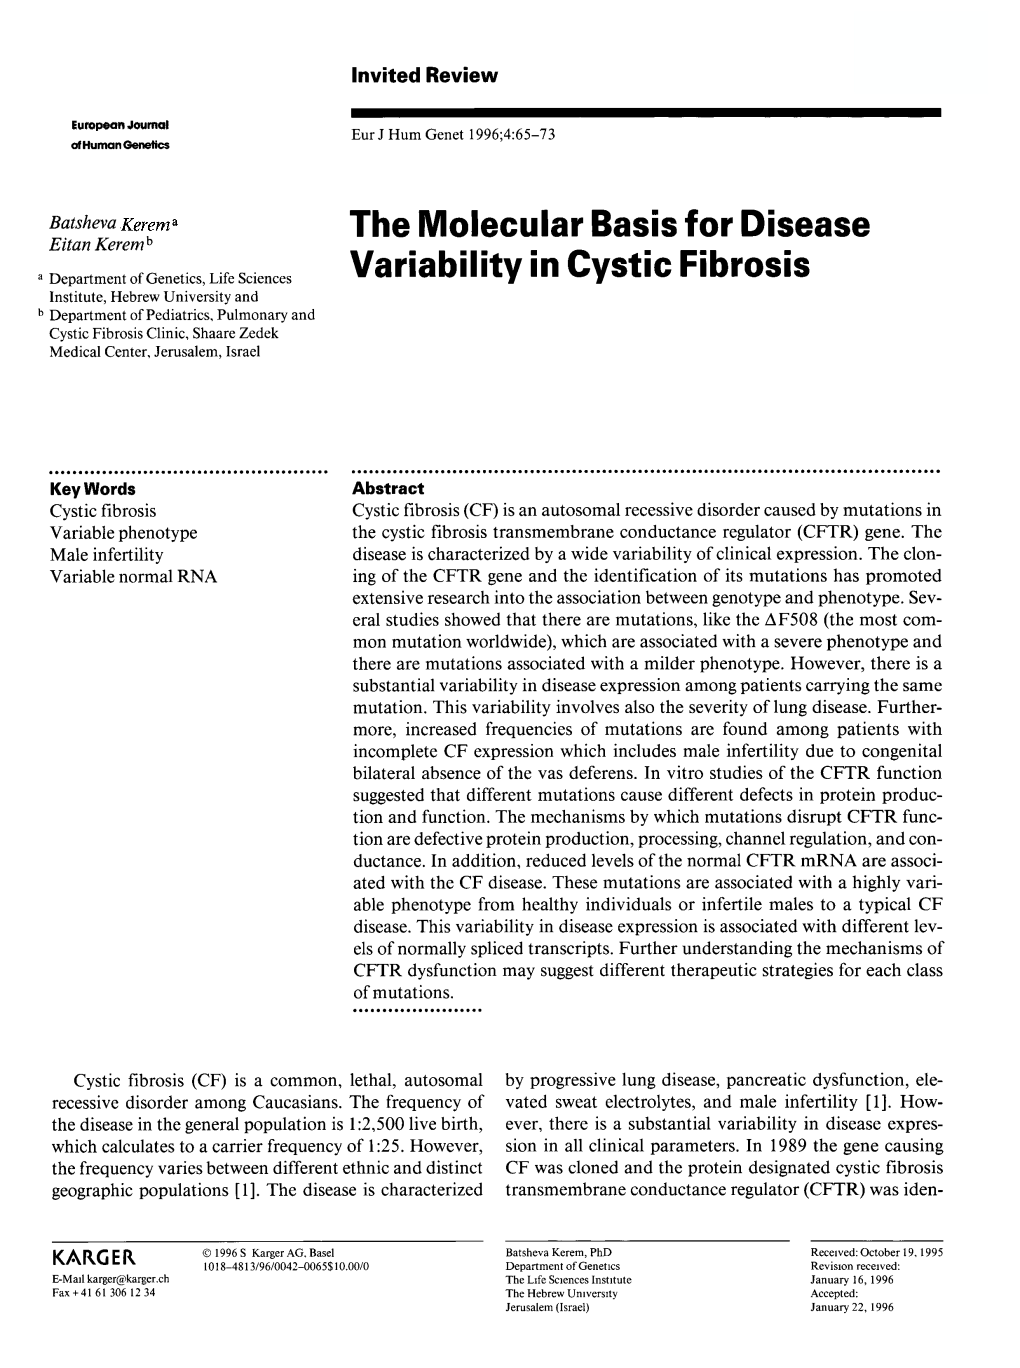 The Molecular Basis for Disease Variability in Cystic Fibrosis